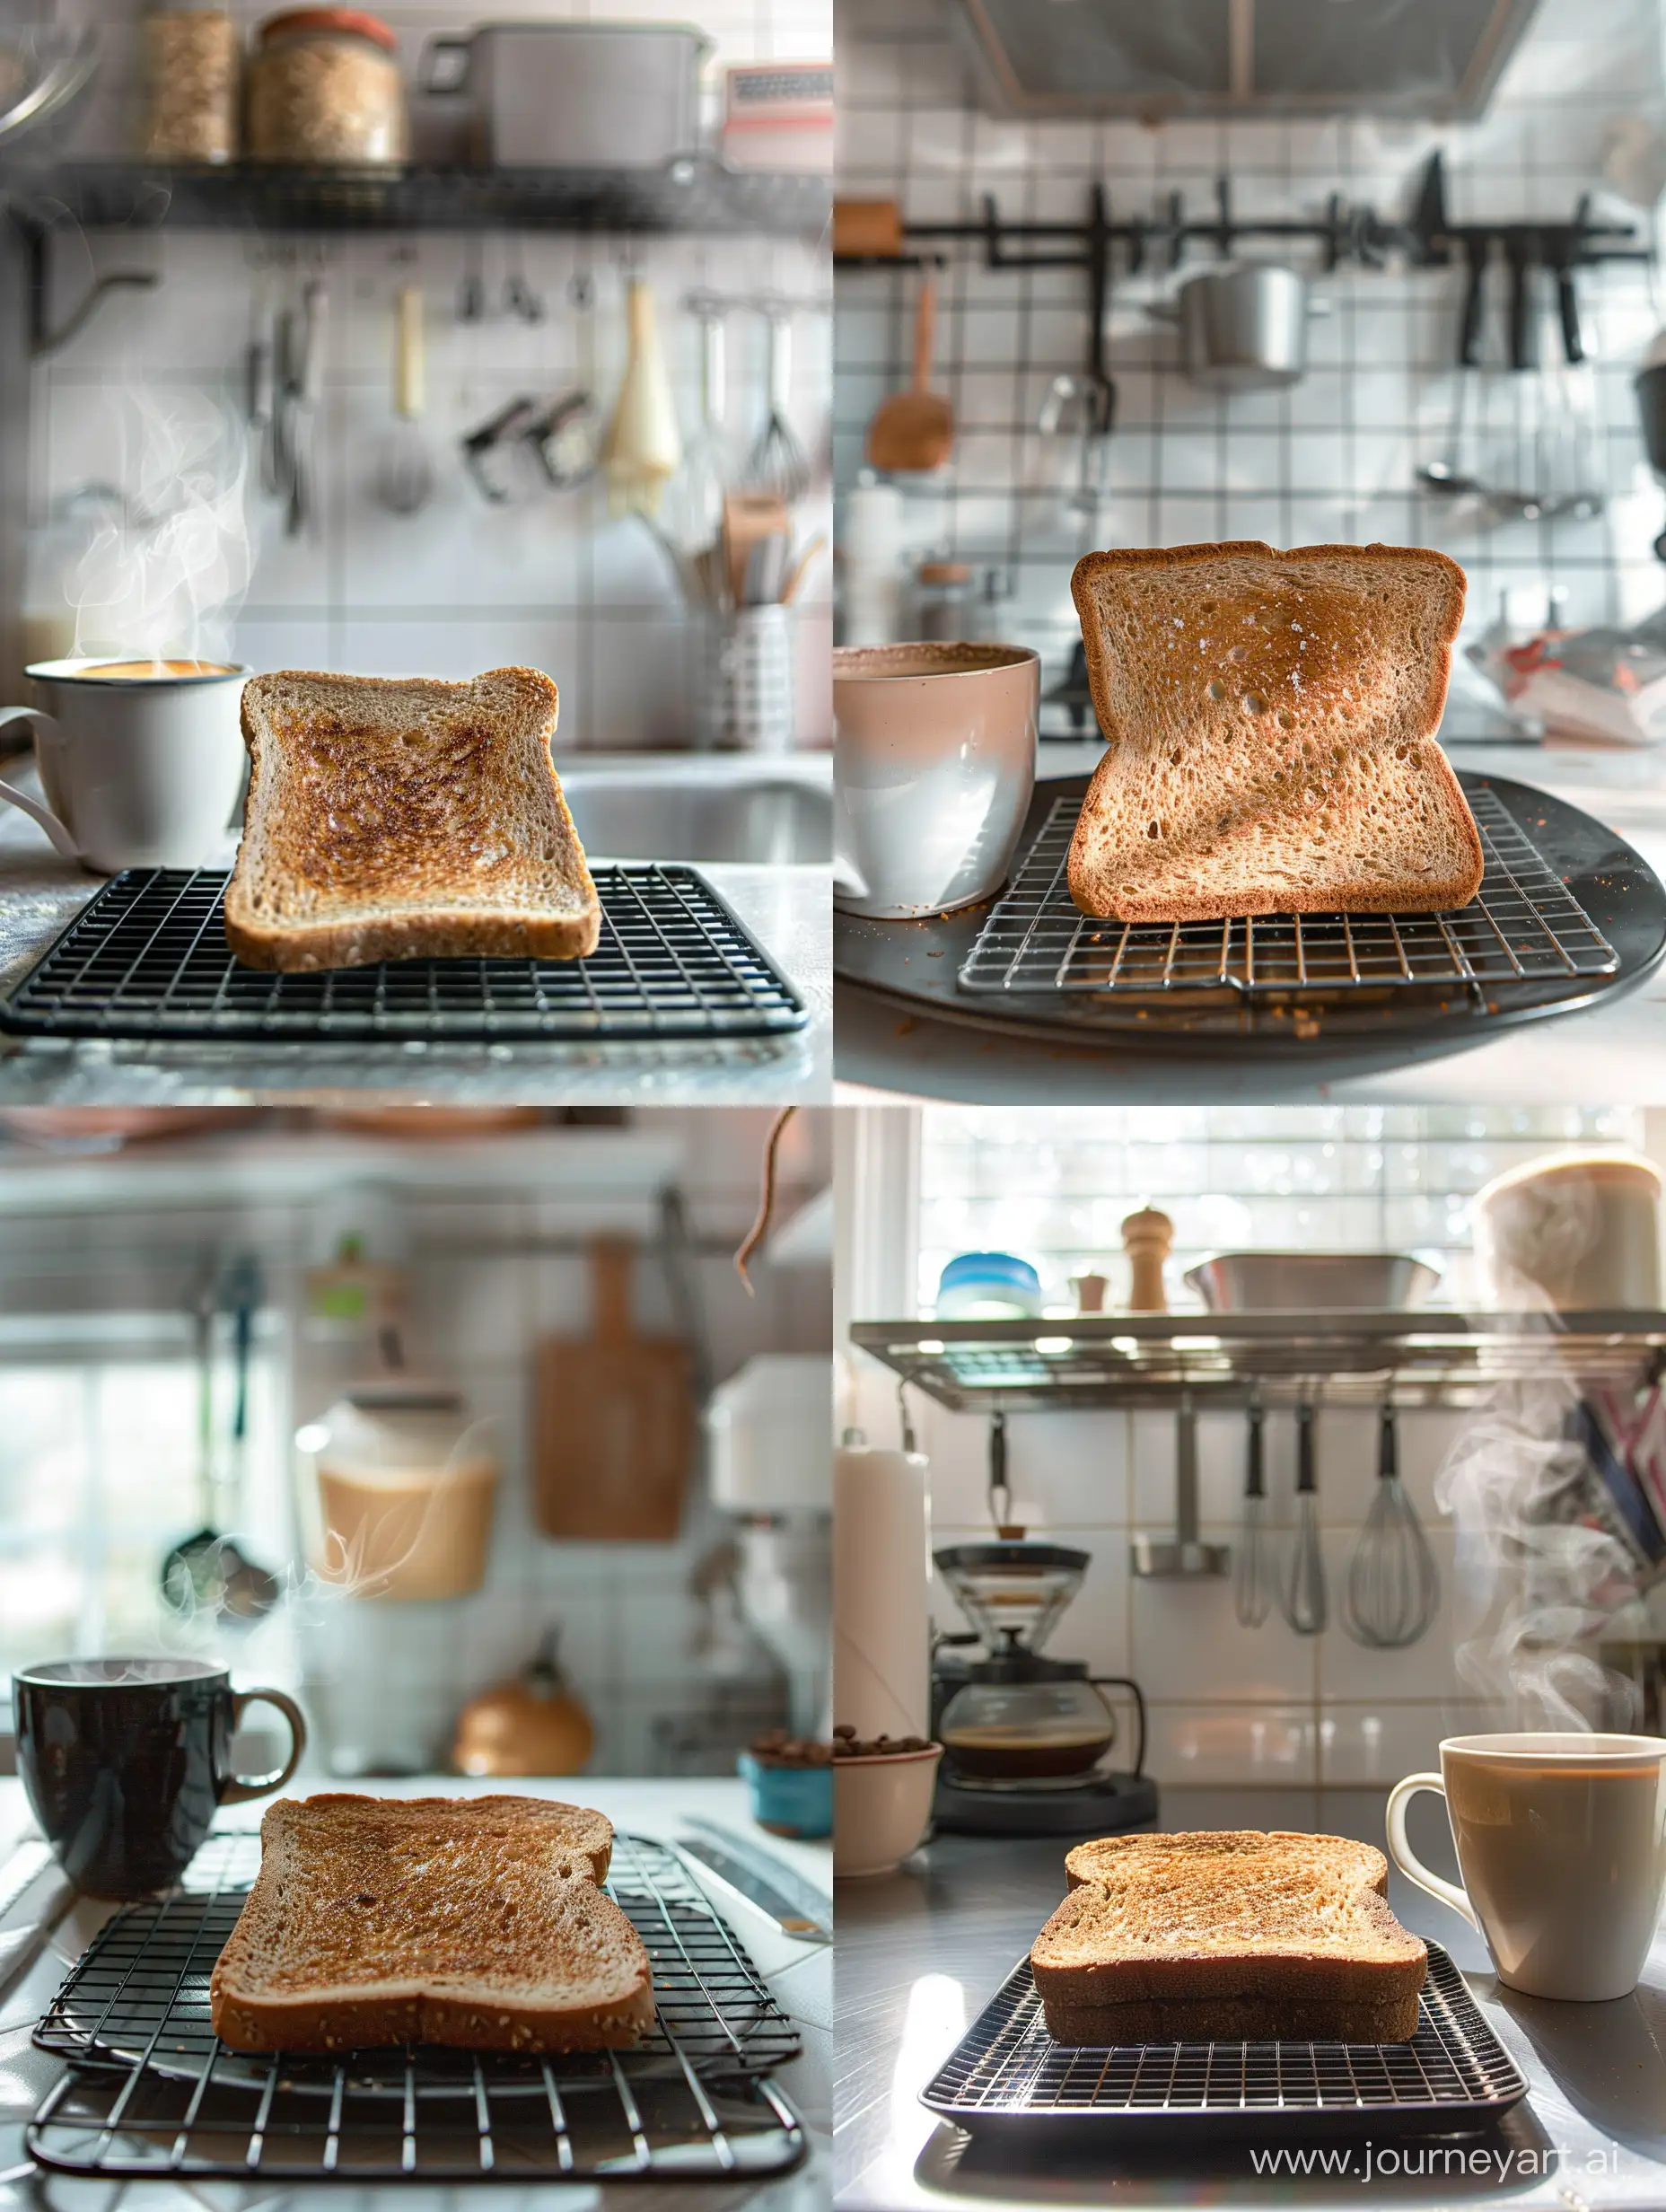 Healthy-Breakfast-Whole-Wheat-Toast-with-American-Coffee-in-Bright-Kitchen-Setting